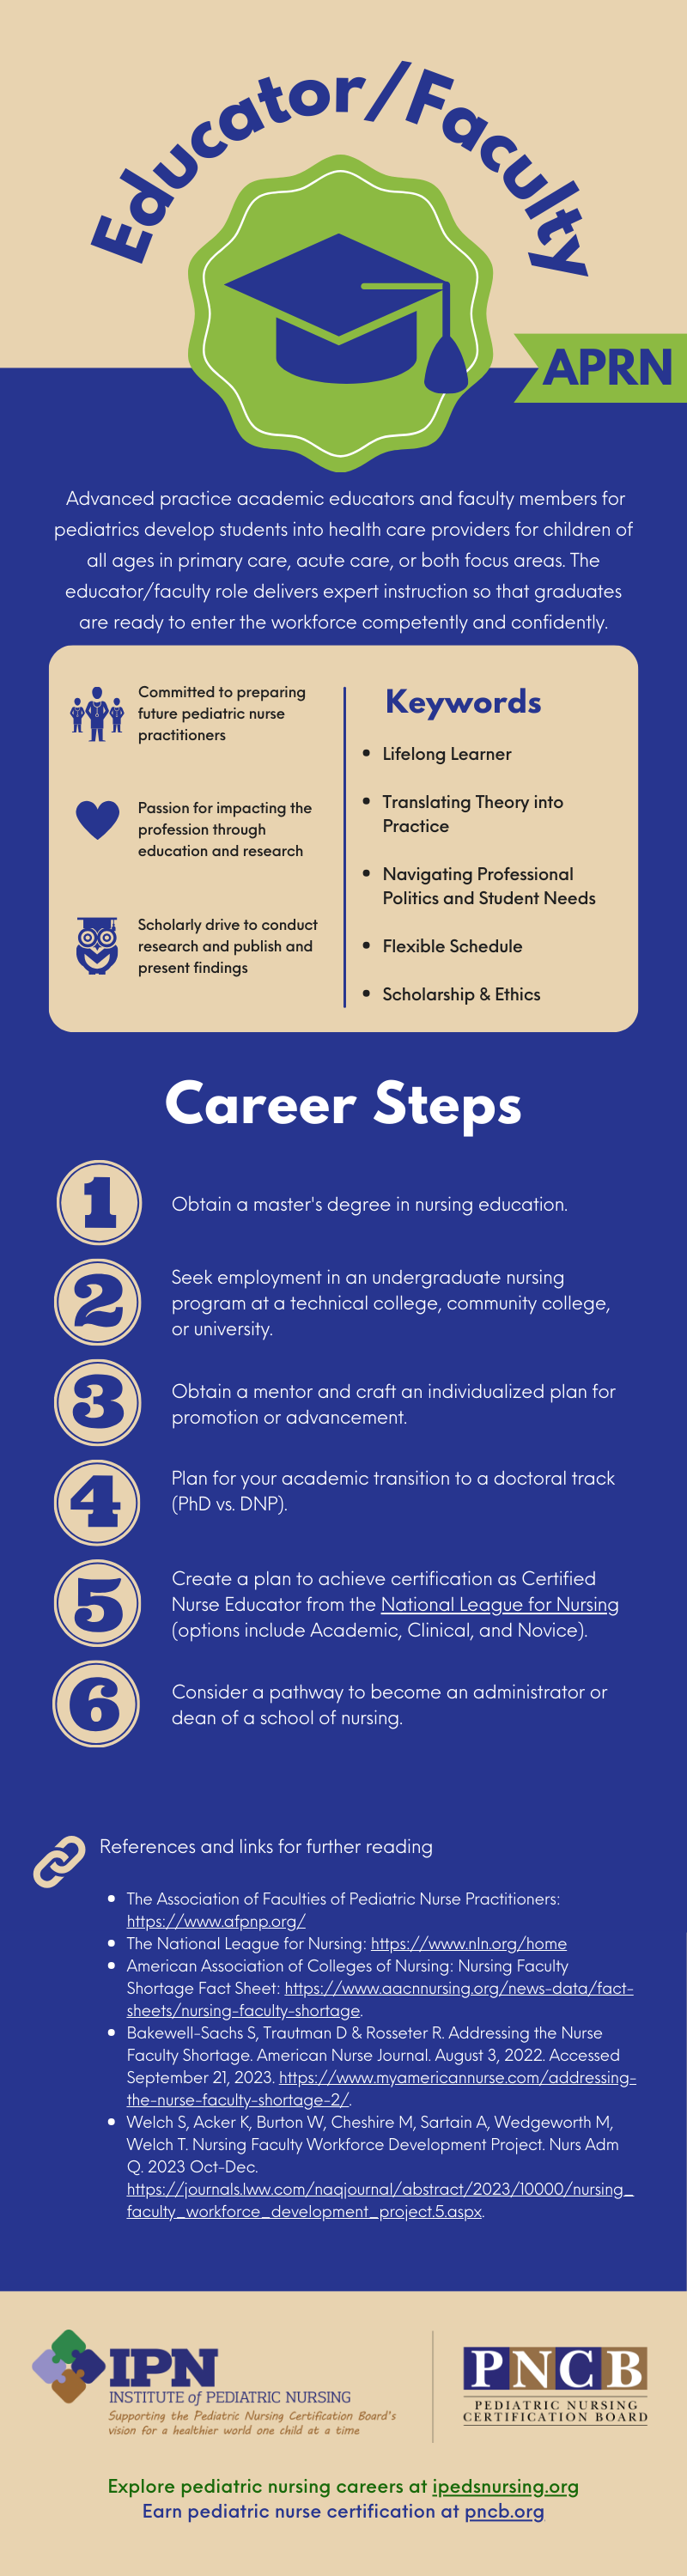 ID: Infographic describing steps to be an Educator/Faculty for APRNs - see PDF for details